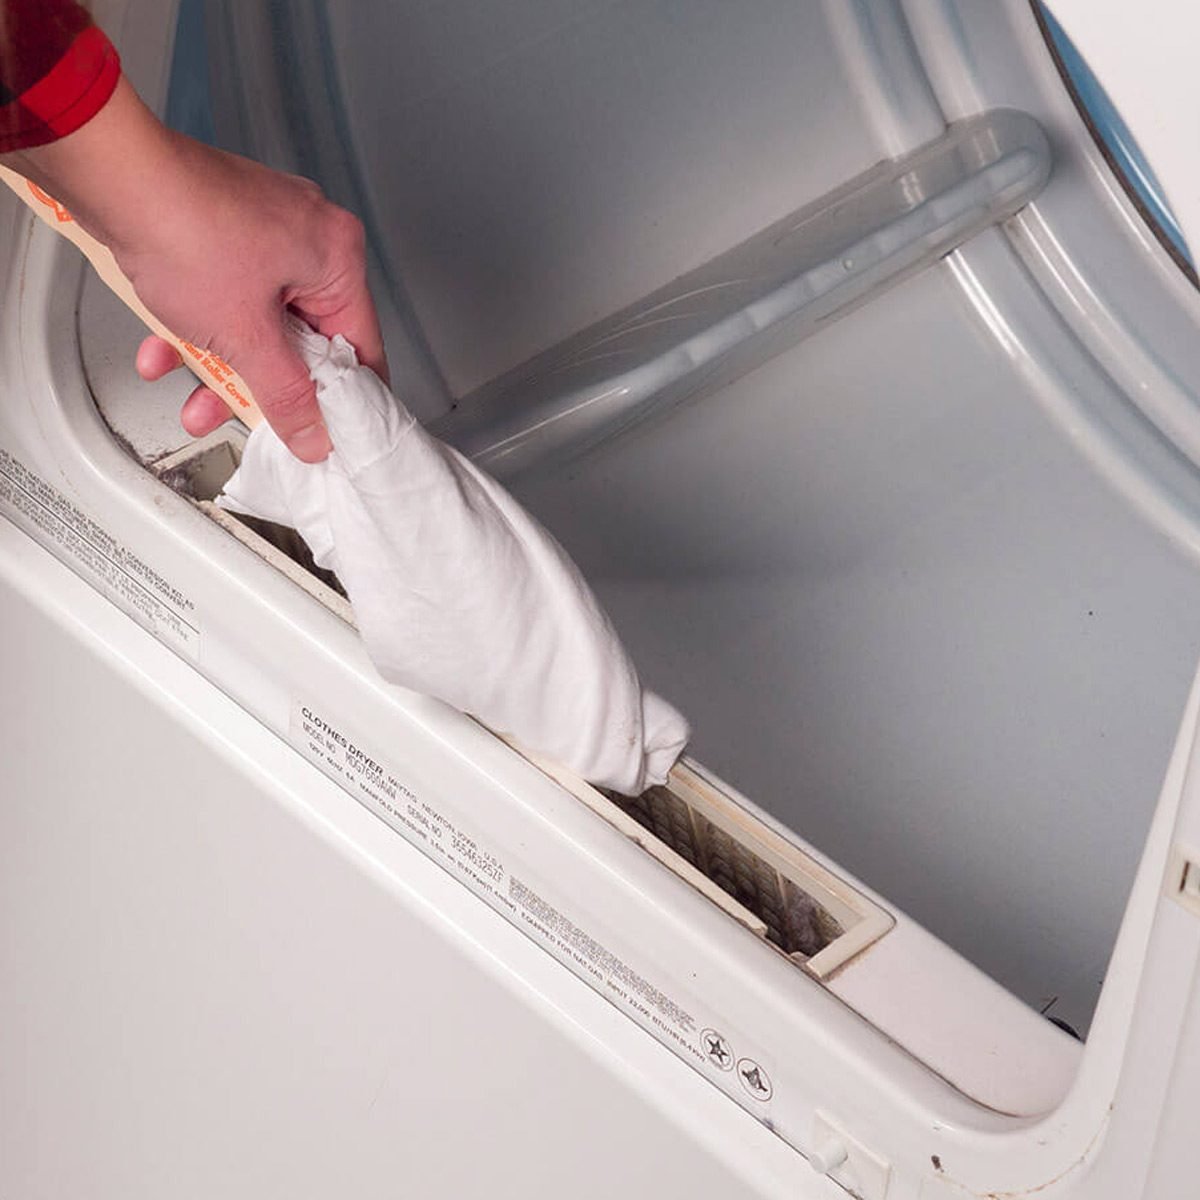 laundry room ideas cleaning around lint trap on dryer